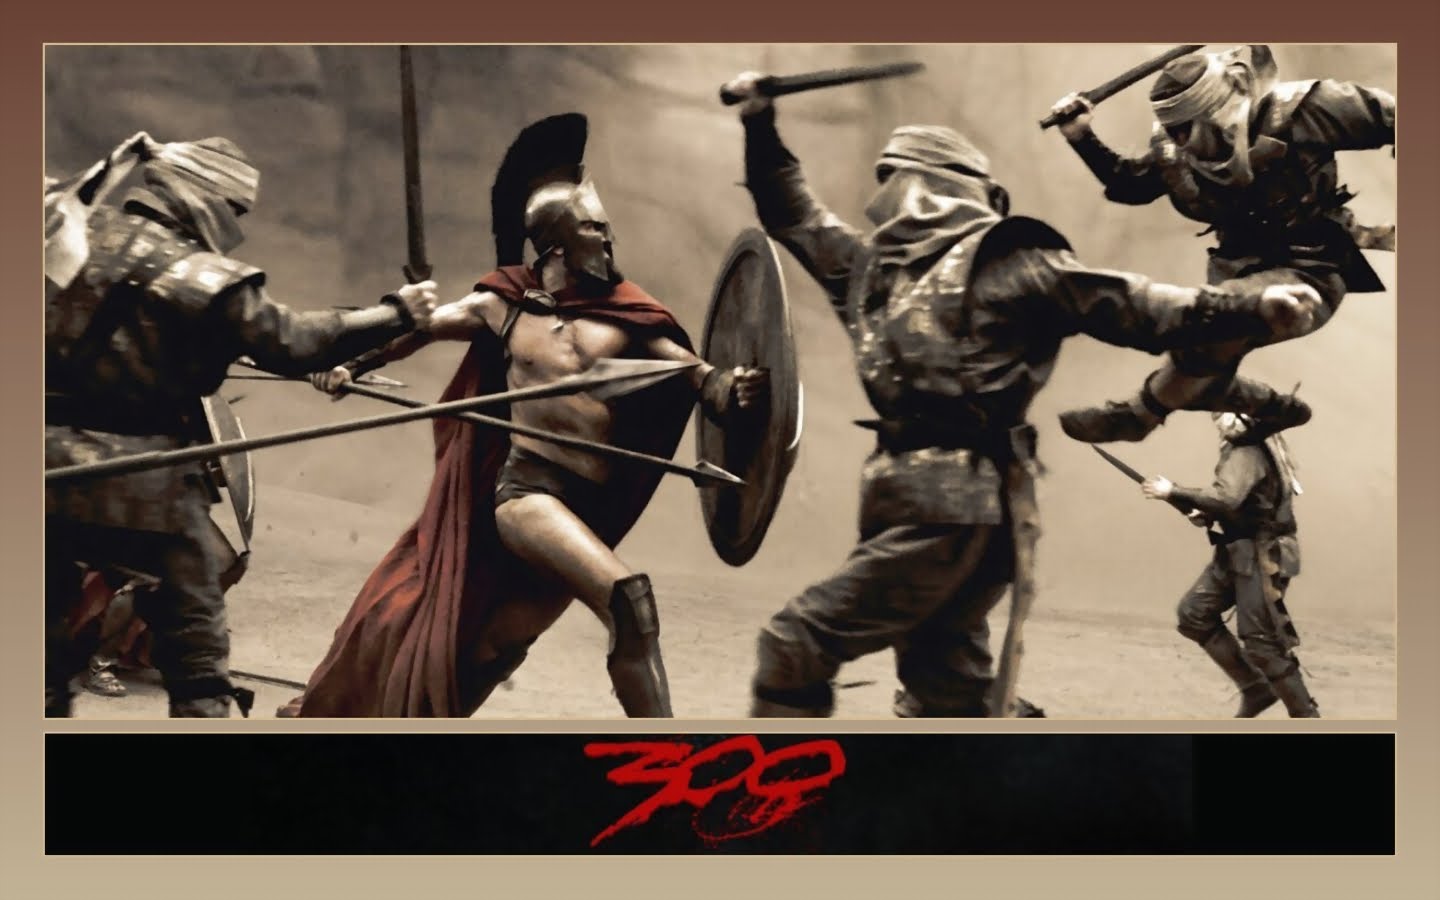 300 Movie Wallpapers HD | Wide Screen Hollywood Walpaper HD Hot ...